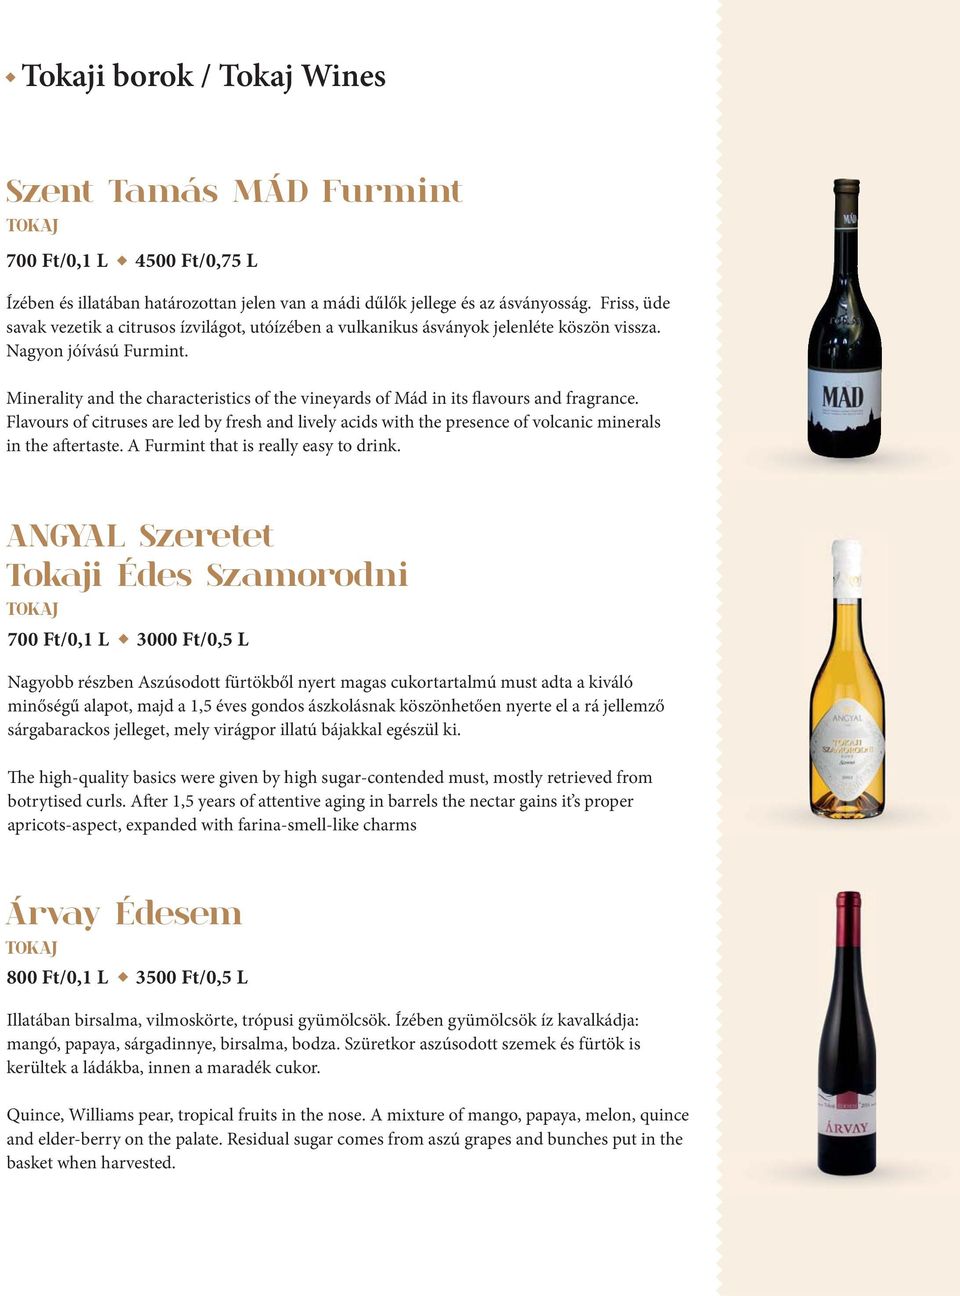 Minerality and the characteristics of the vineyards of Mád in its flavours and fragrance.